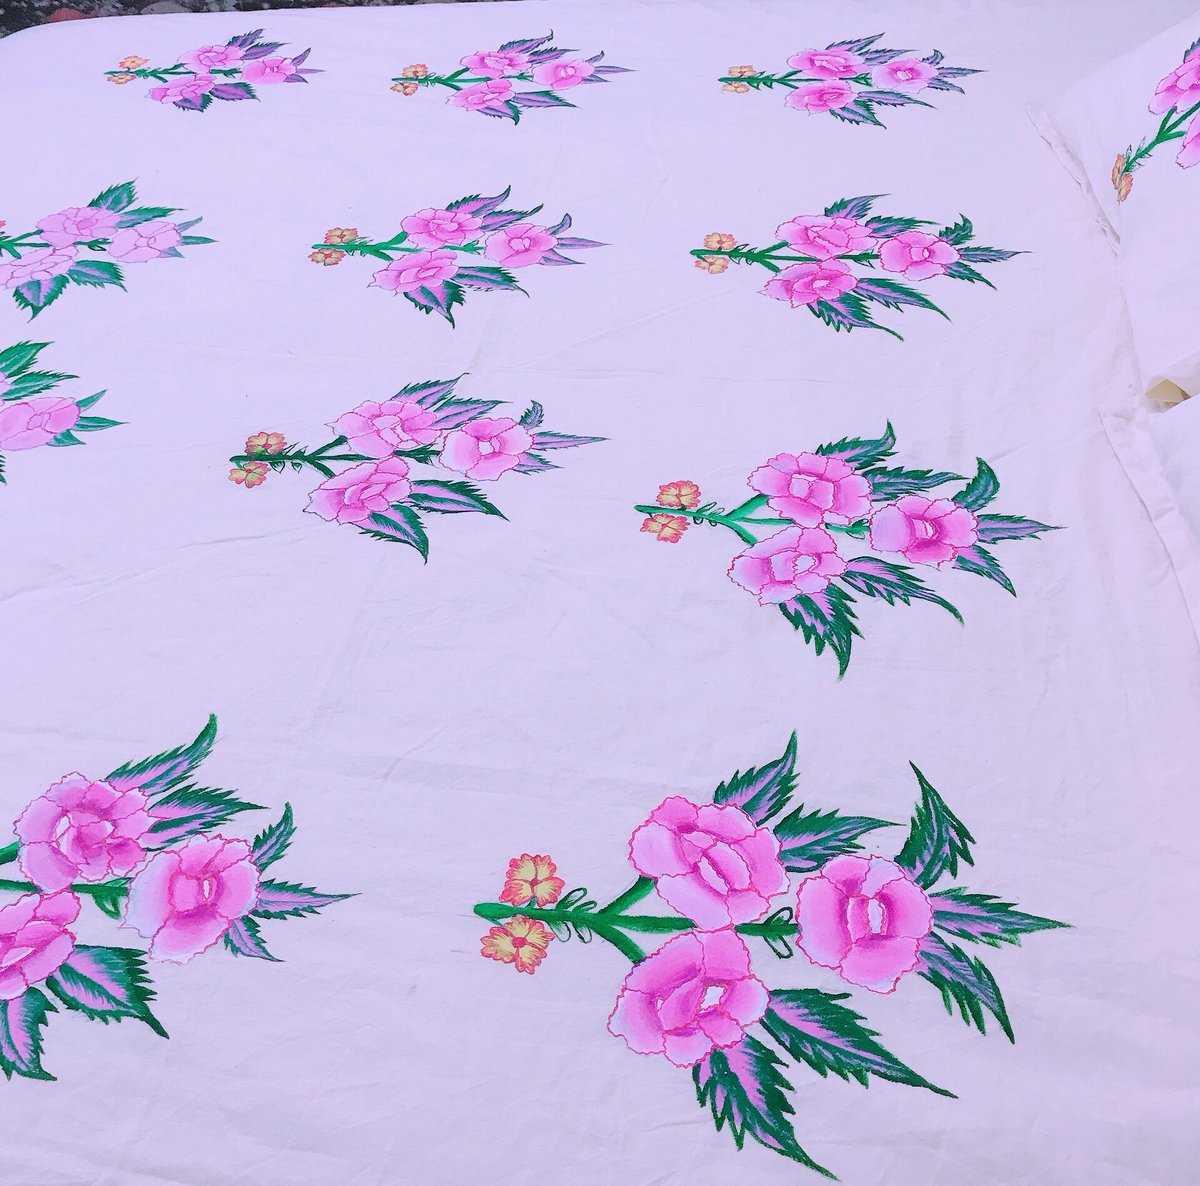 New Rose Design Fabric Painting.Subscribe our YouTube Channel-Fabric Art Gallery for more.

#fabric#fabricpainting #FabricArtGallery #painting #fabricdesign #new #flowers #floraldesign #floral #twitter #youtube #homedecor #bedsheet #painting #bedsheetdesign #handpainted